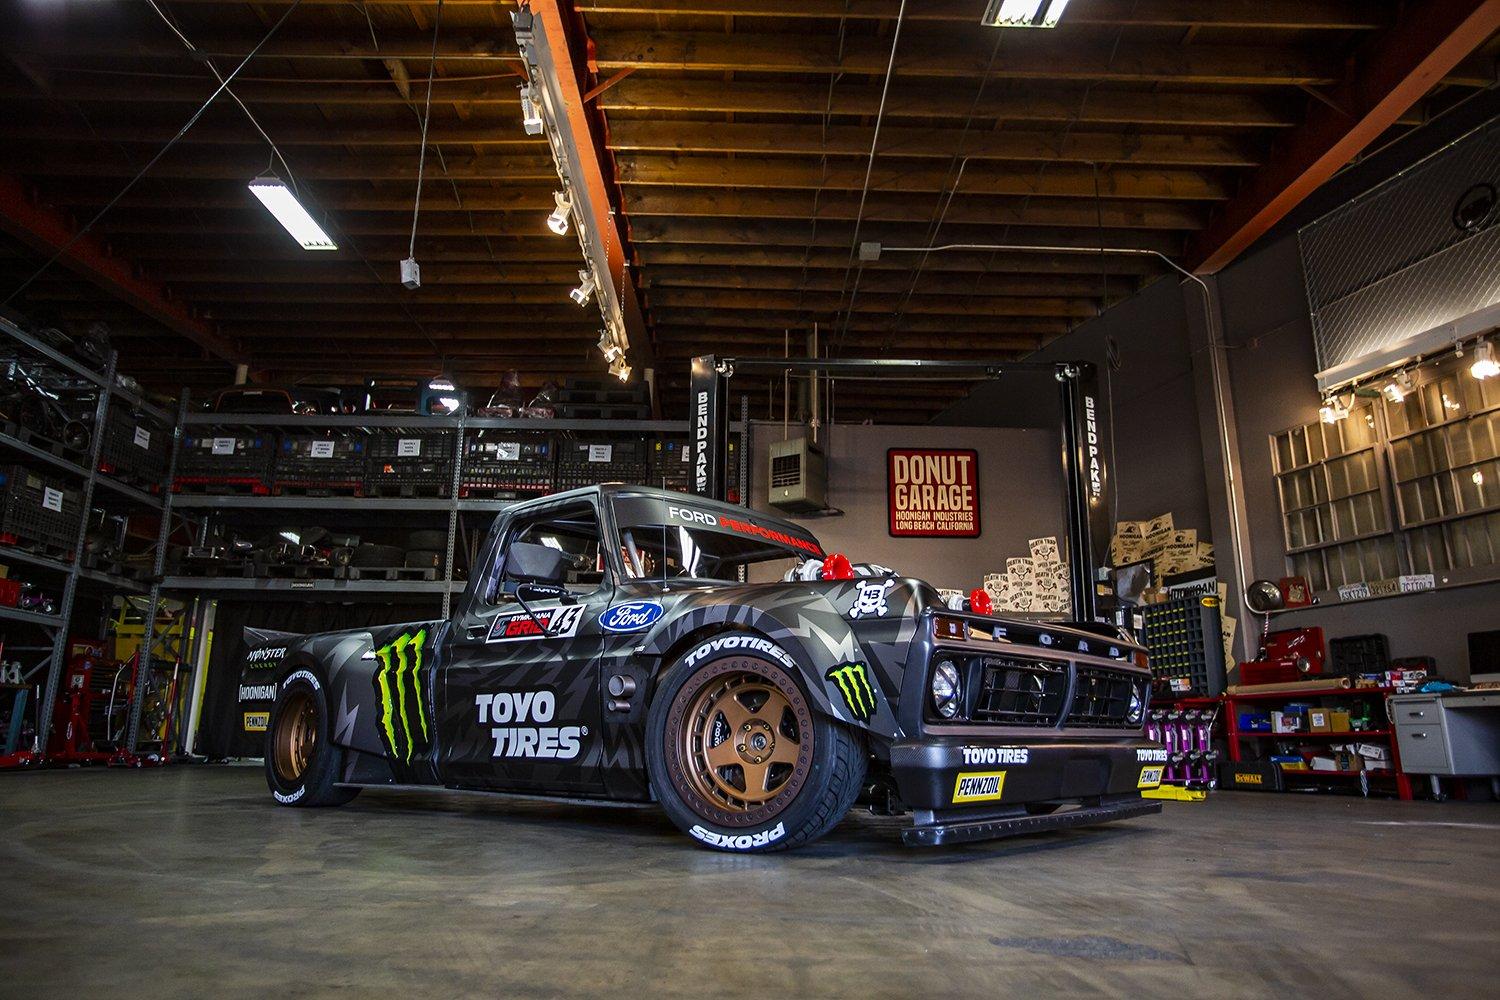 Ken Block's Hoonitruck: Twin Turbo, AWD, 914hp, and Ready to Party in Gymkhana TEN